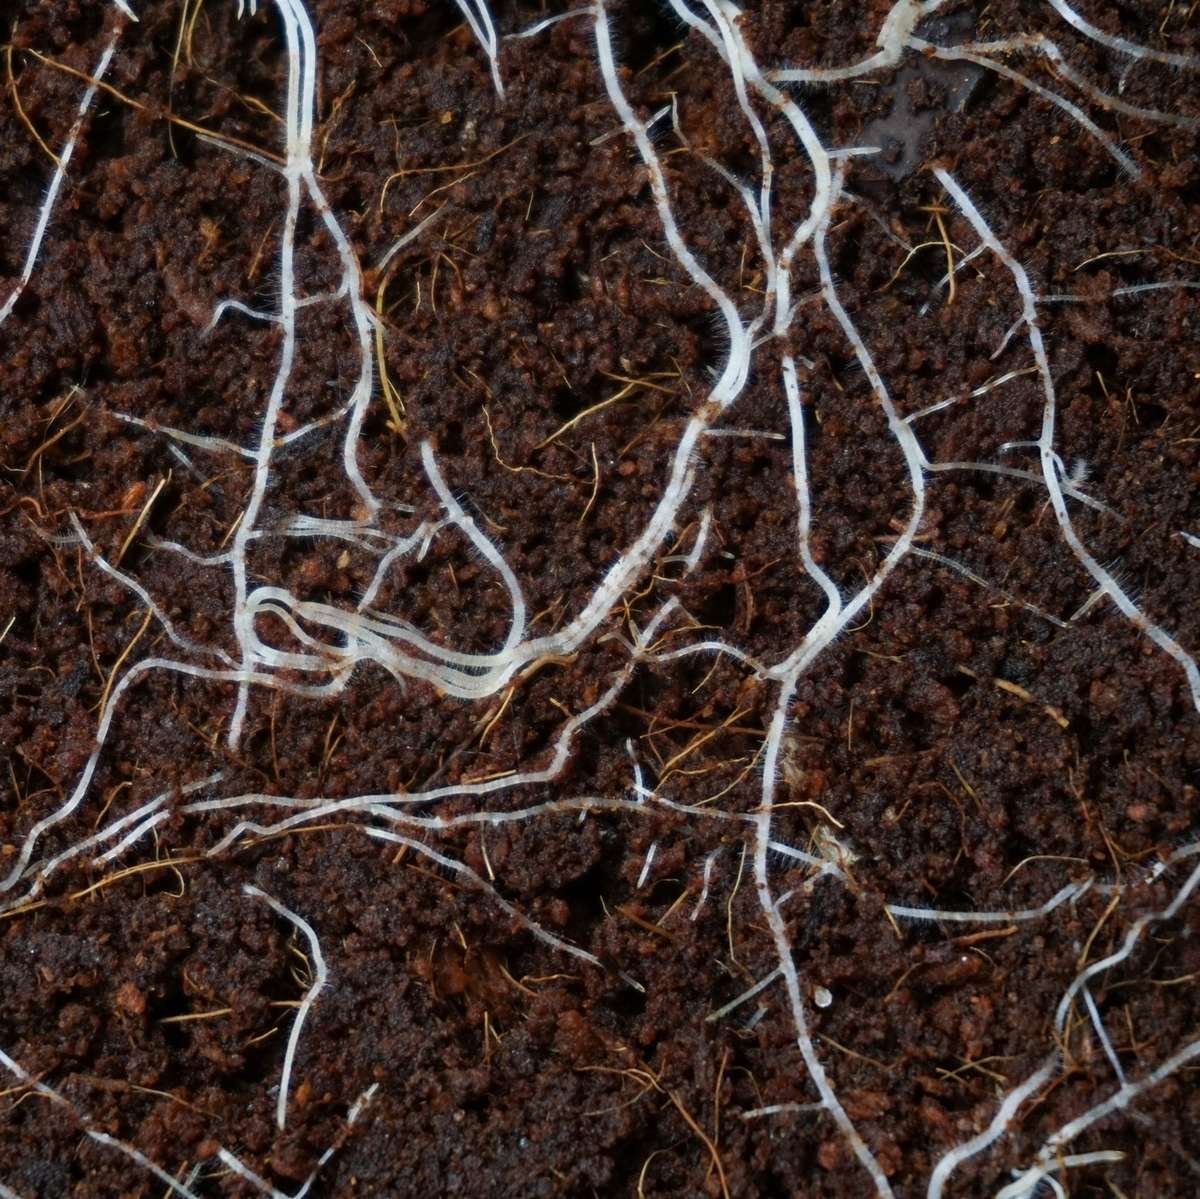 Roots in Soil